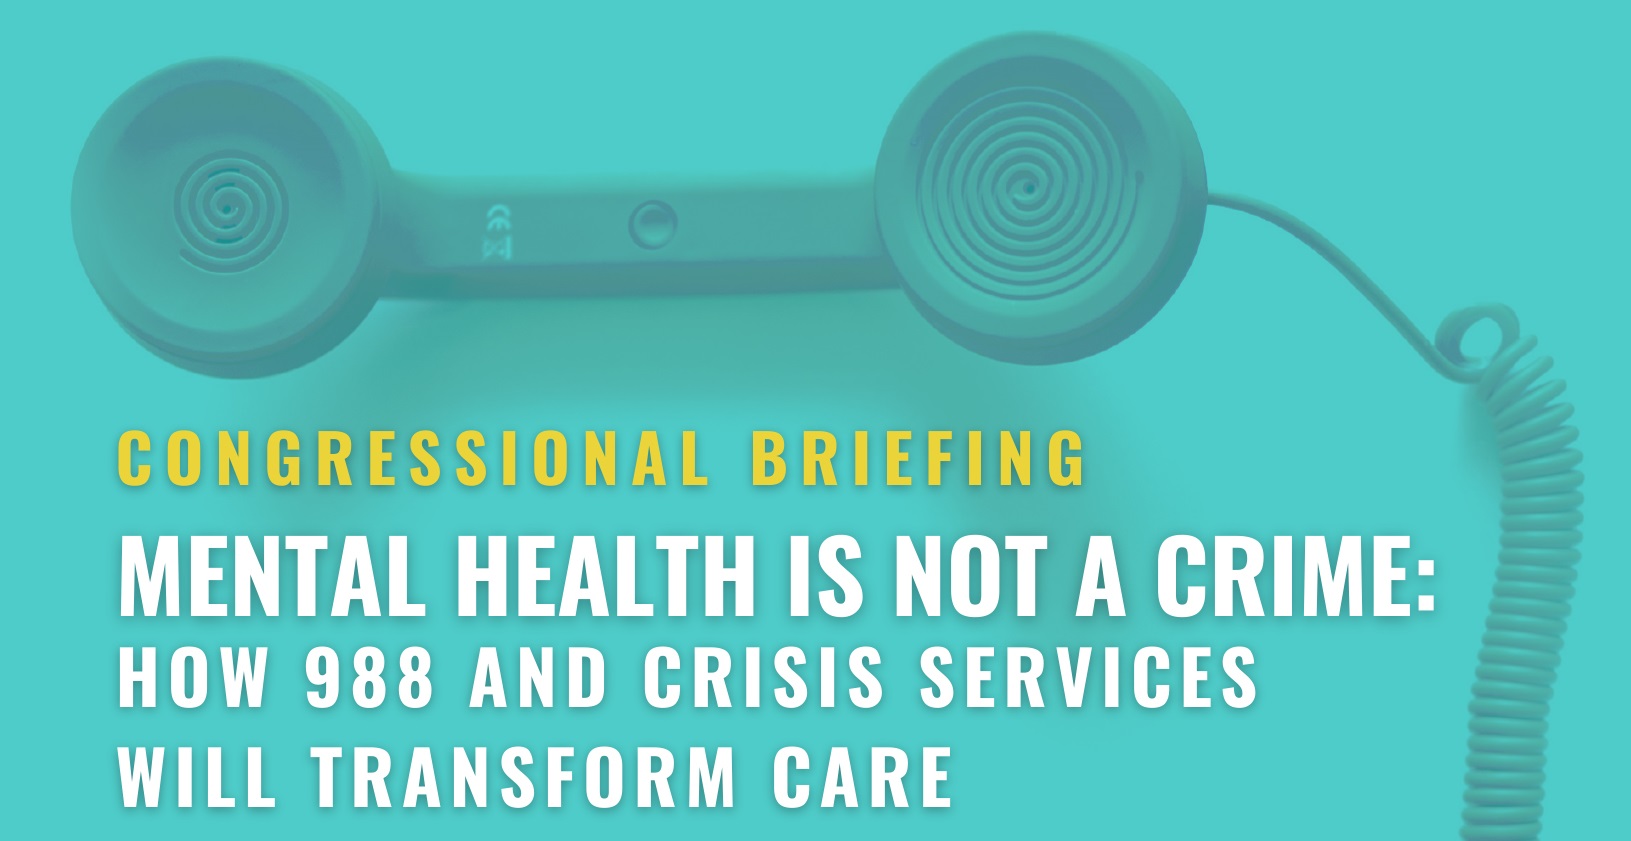 National Response Congressional Briefing Series - Mental Health is Not a Crime: How 988 and Crisis Services Will Transform Care